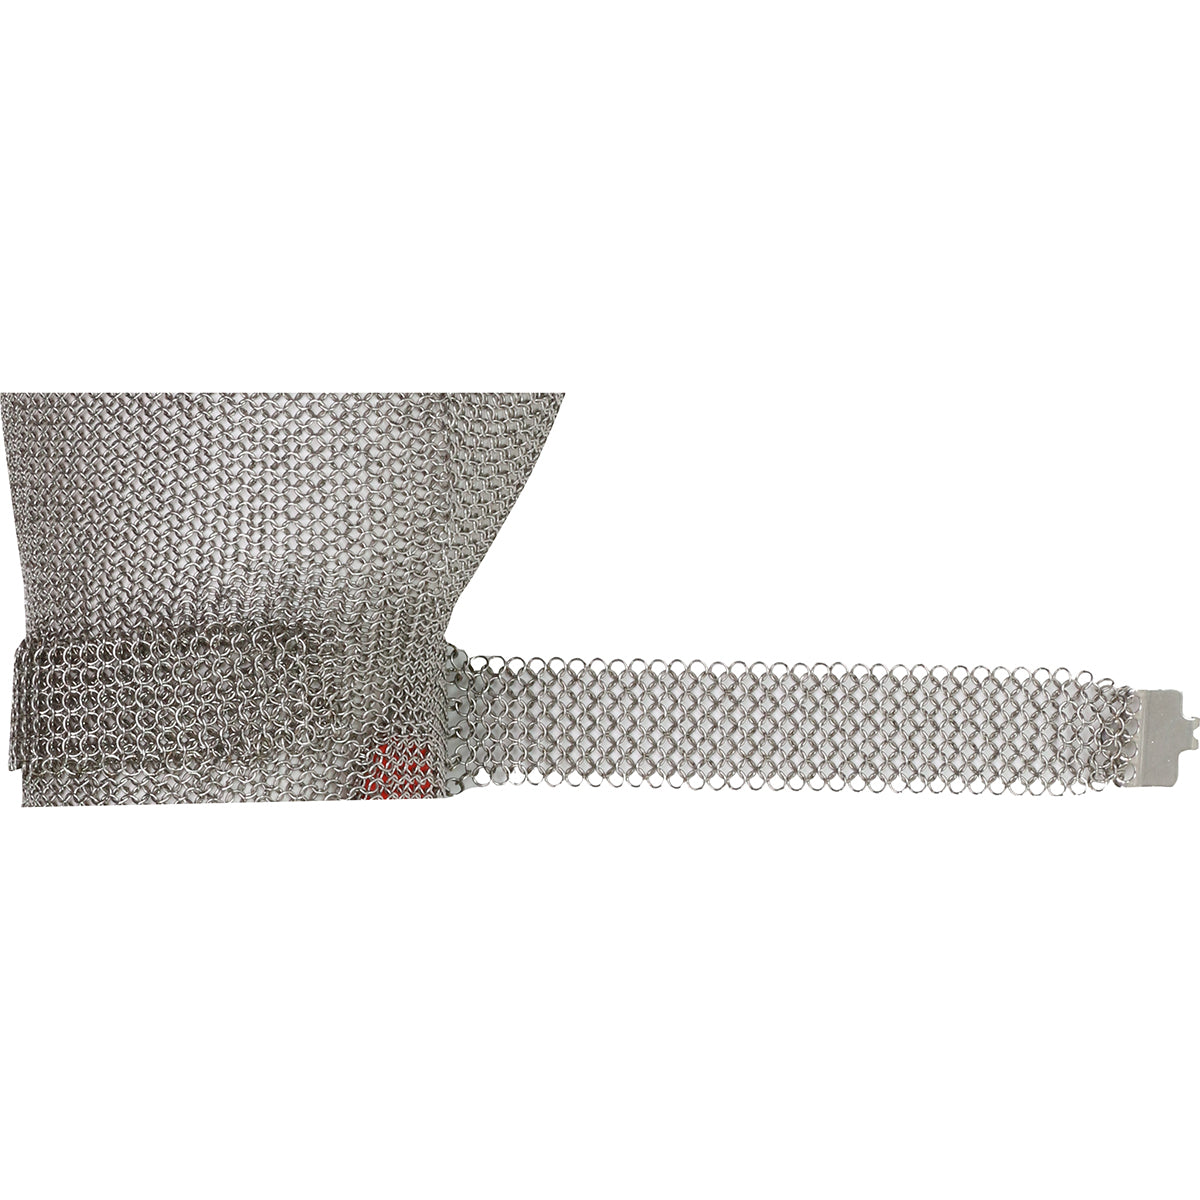 US Mesh USM-1547-L Stainless Steel Mesh Glove with Spring Closure - Forearm Length